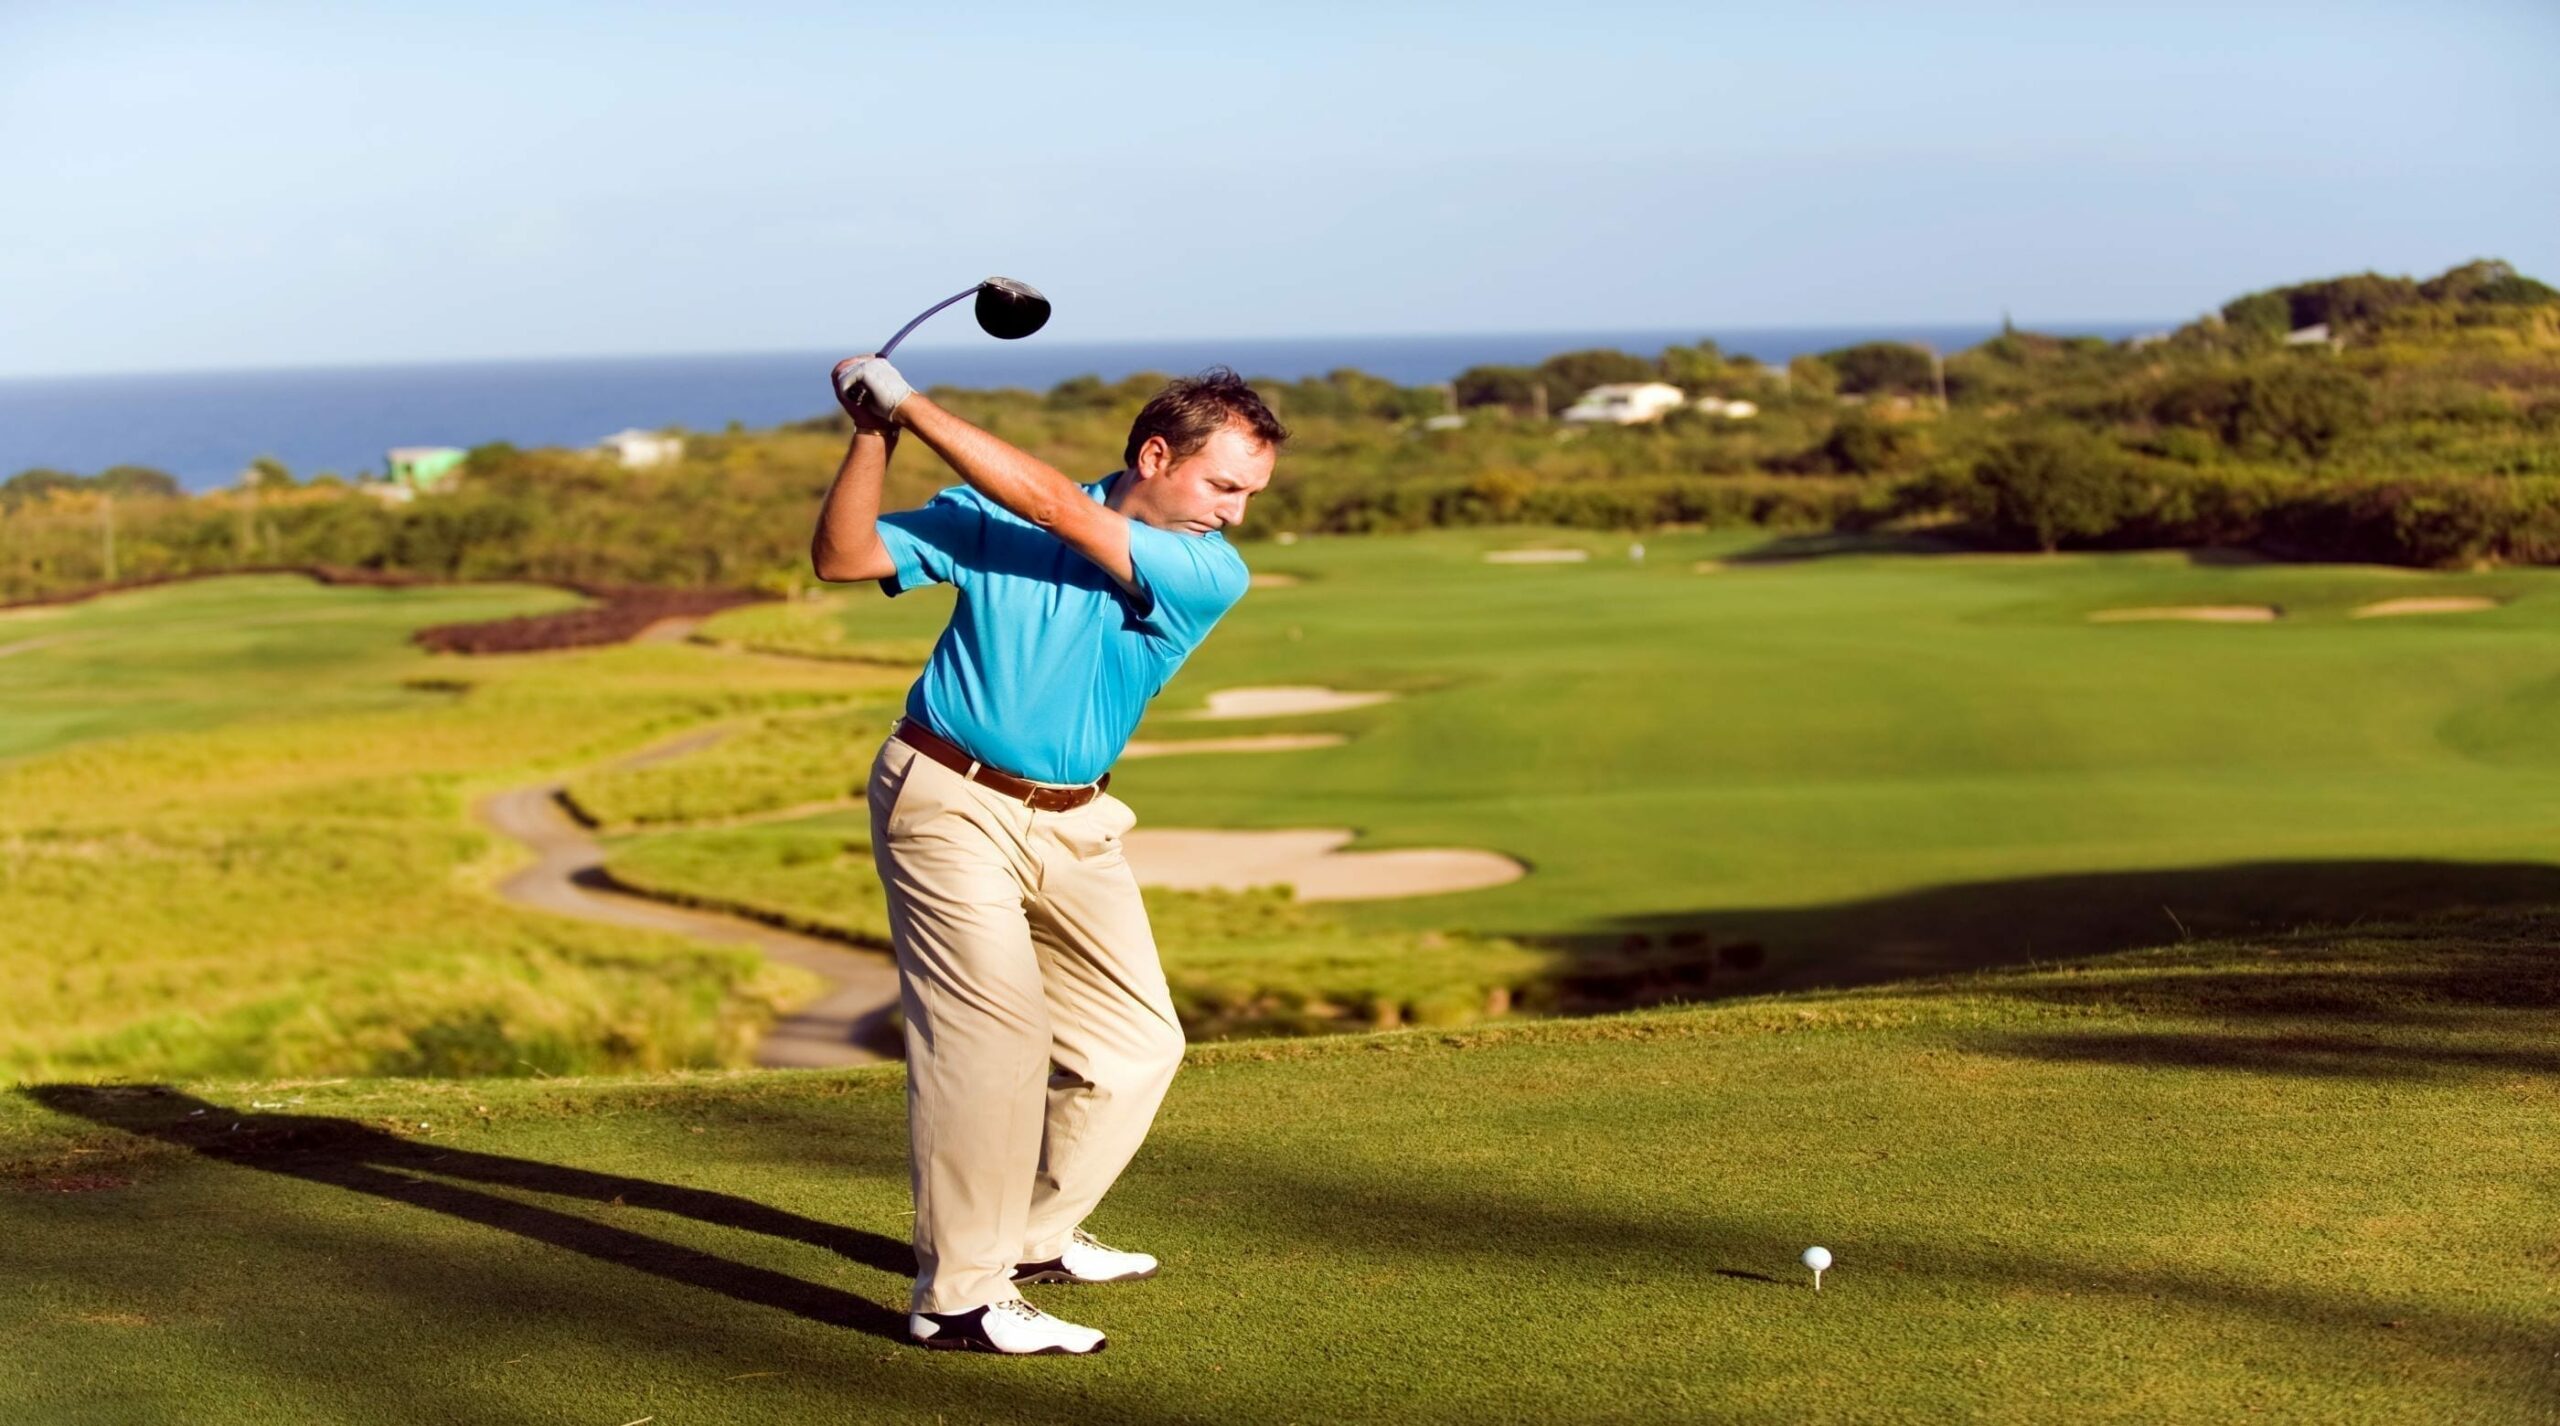 Improve Golf Performance while Reducing the Risk of Injury